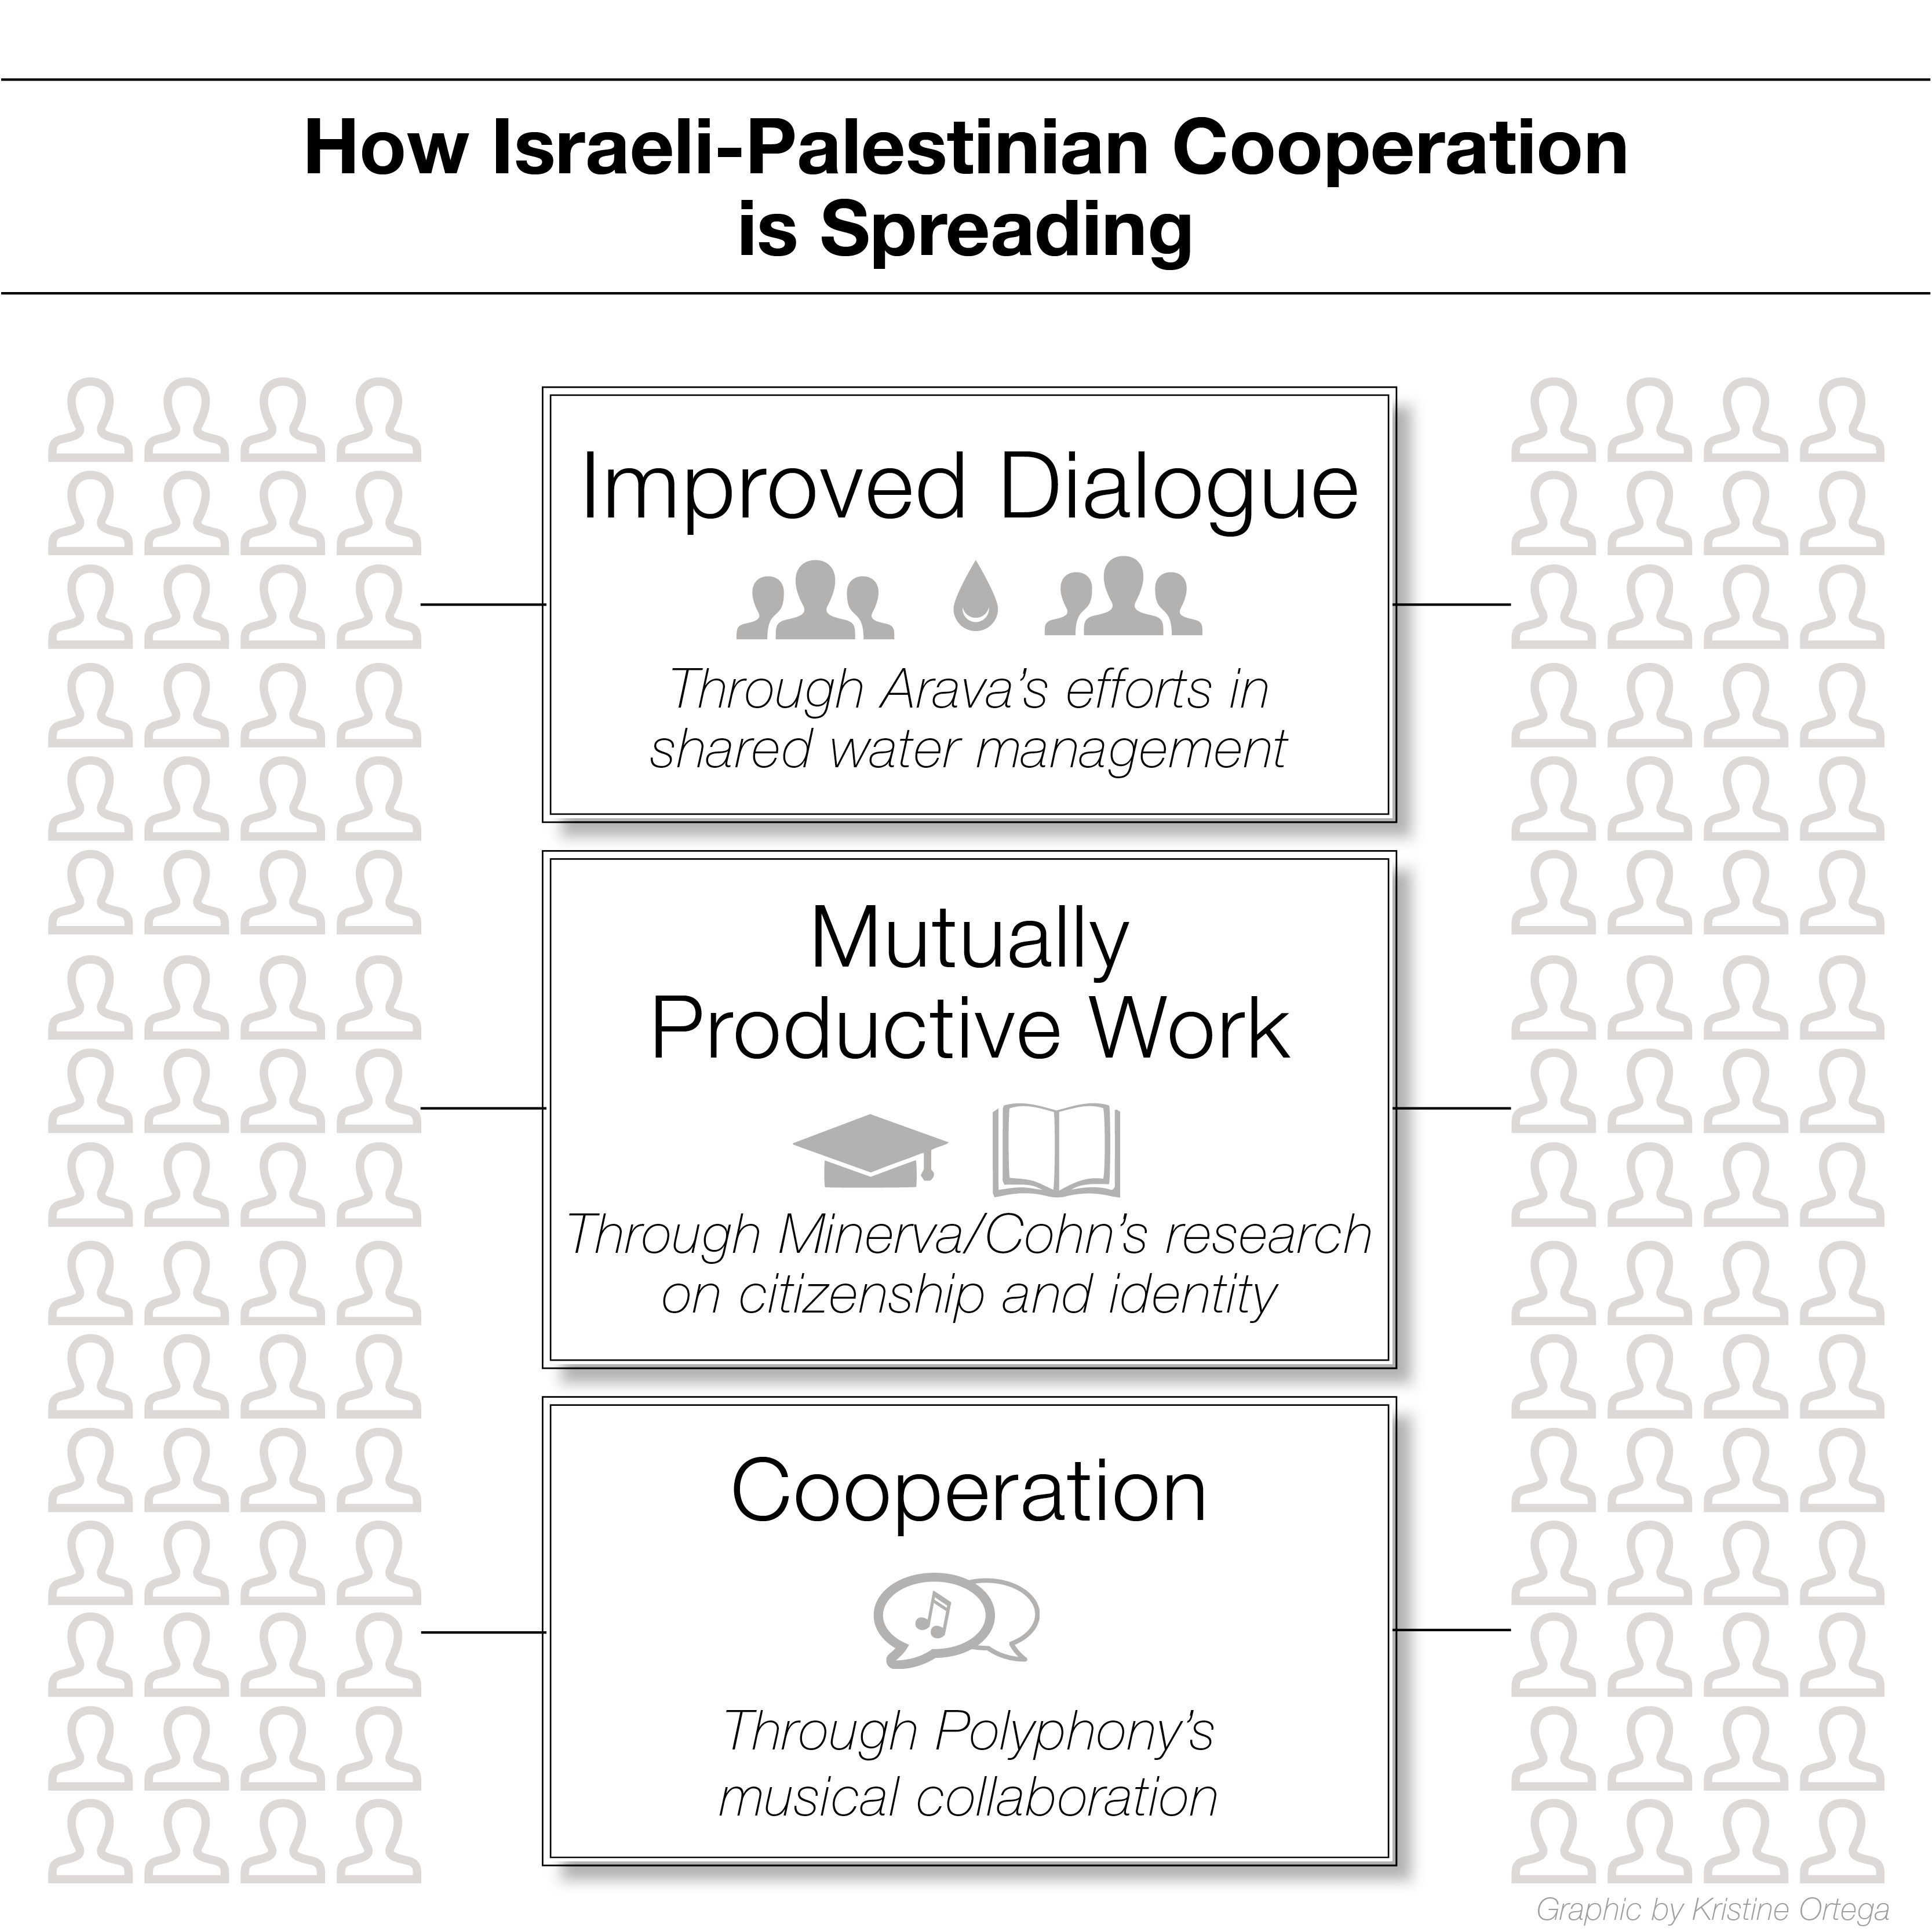 Jennifer Schwab of ENTITY discusses why there's hope for the Israeli-Palestinian cooperation